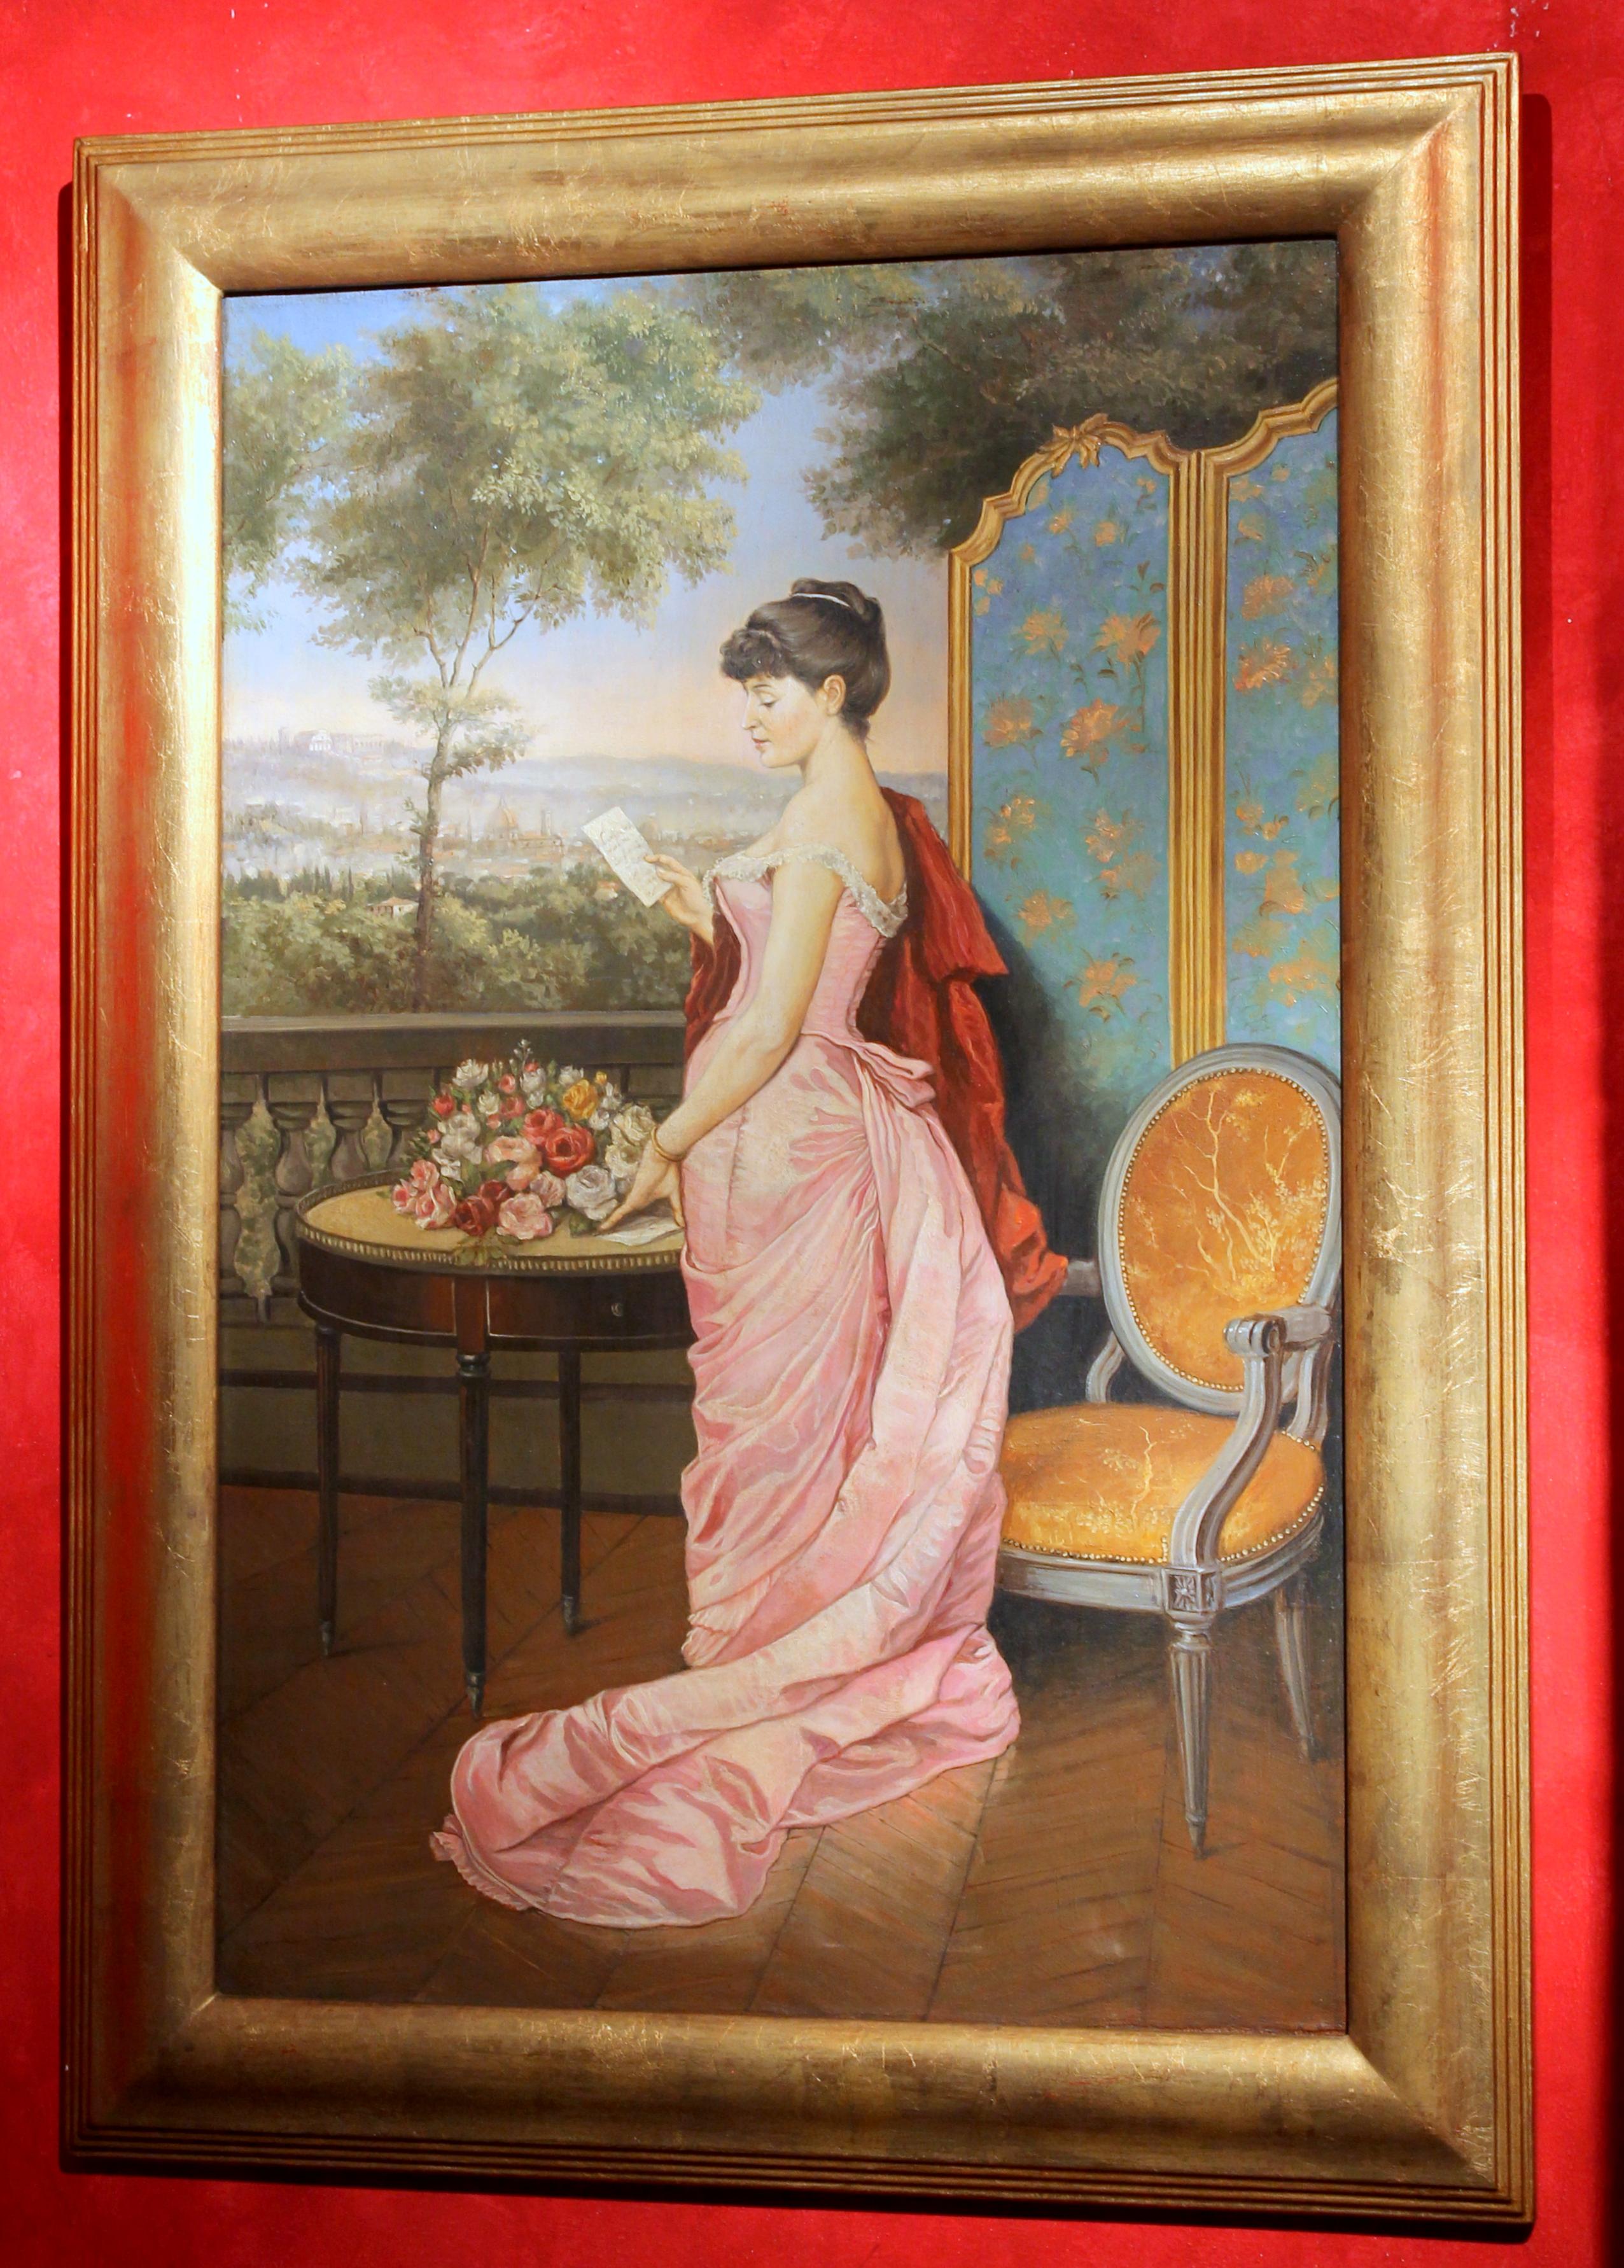 Portrait of an Italian Lady with Florence Landscape Oil on Canvas Painting